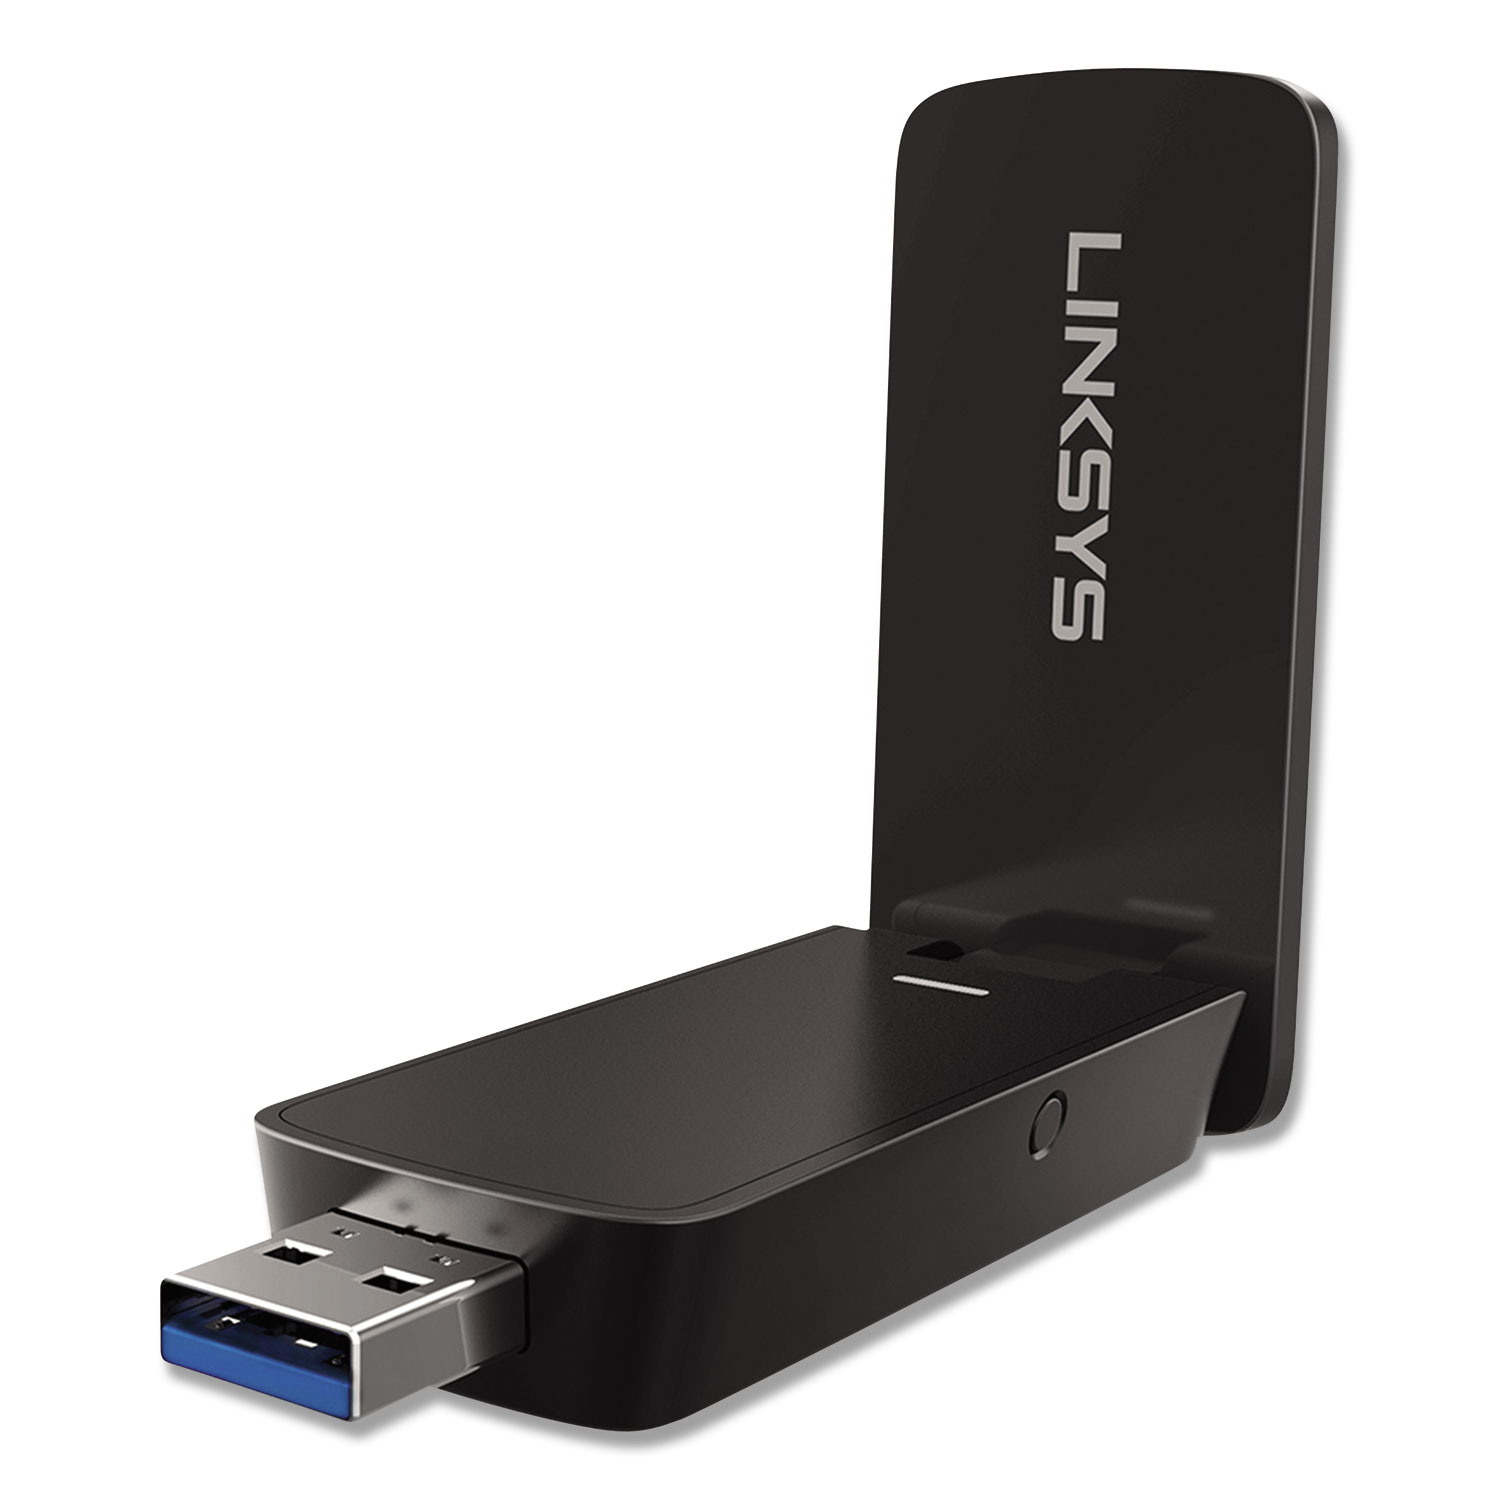 WUSB6400M Max-Stream AC600 Wi-Fi USB Adapter, Laptop to Router